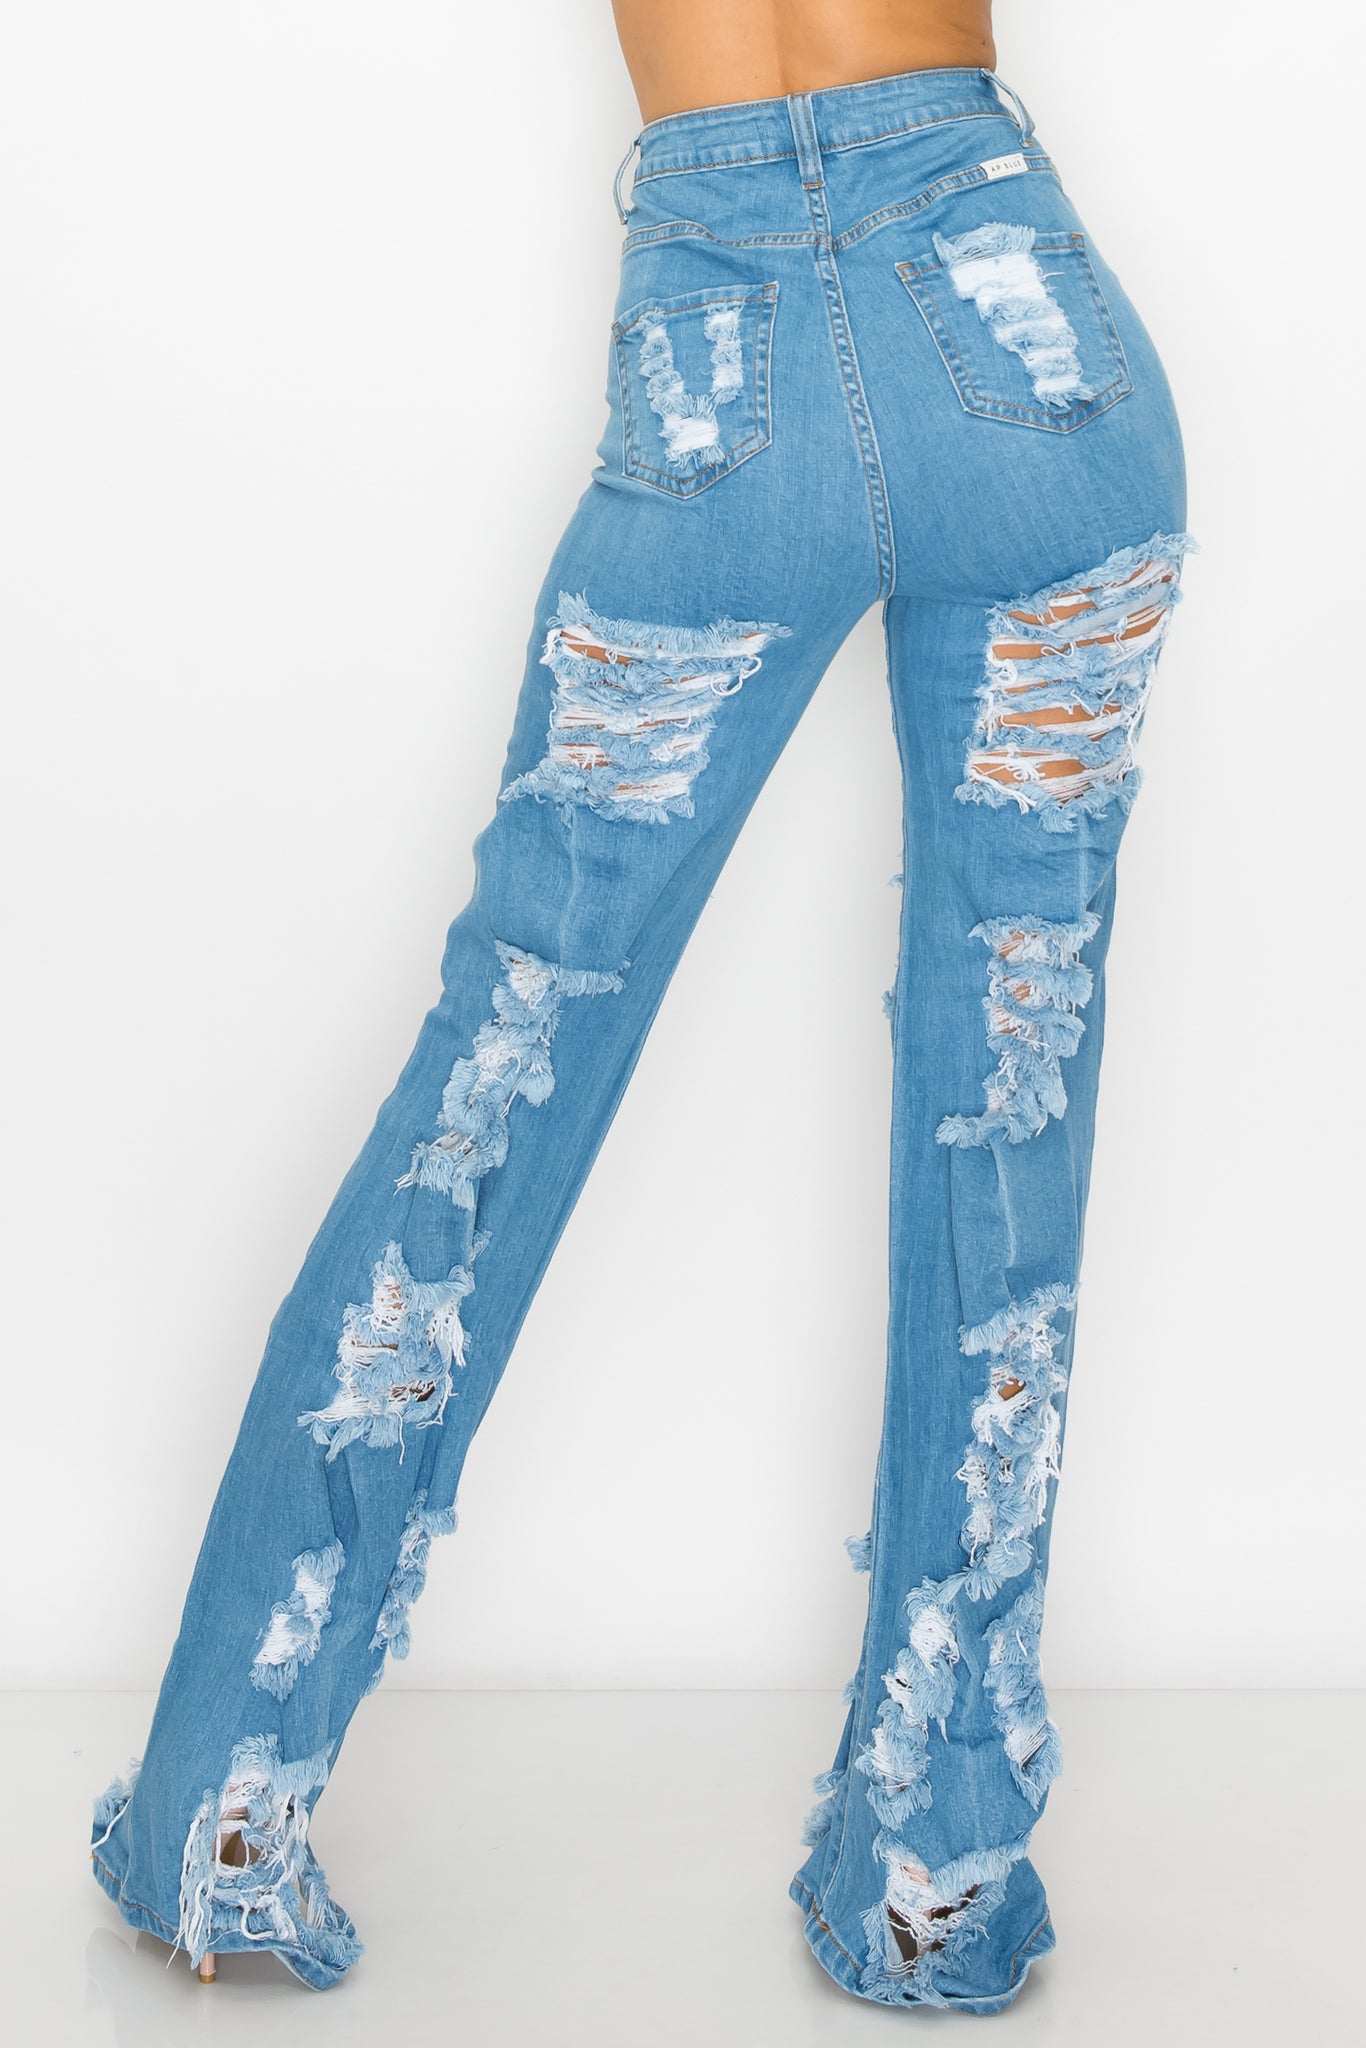 women full length wide super high rise high waisted distressed jeans pants